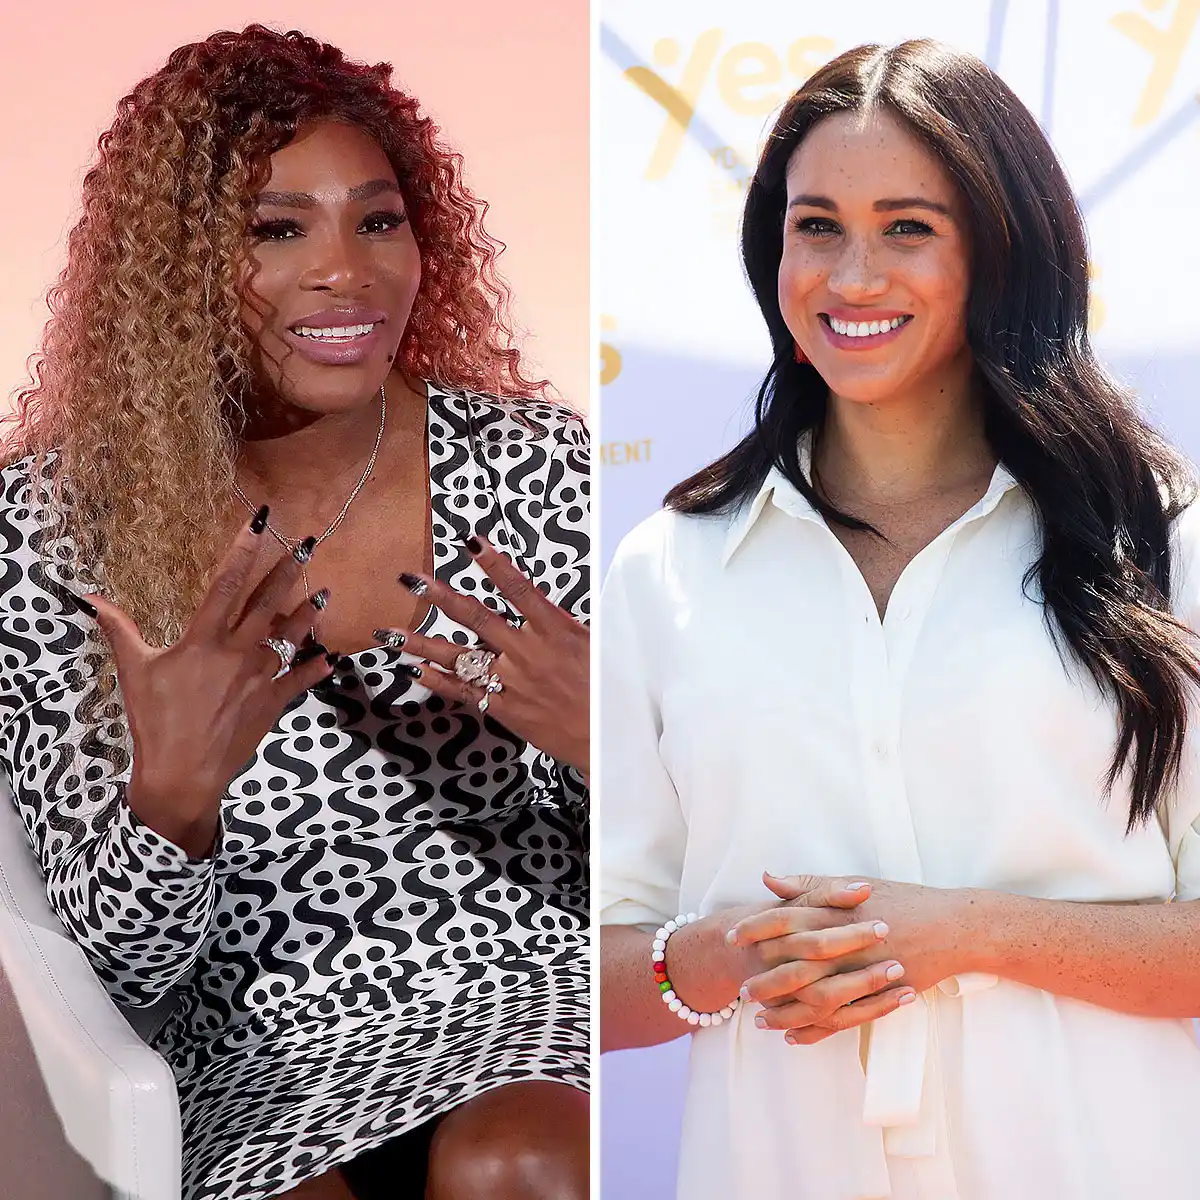 Meghan Markle and Serena Williams’ sweetest quotes about their friendship